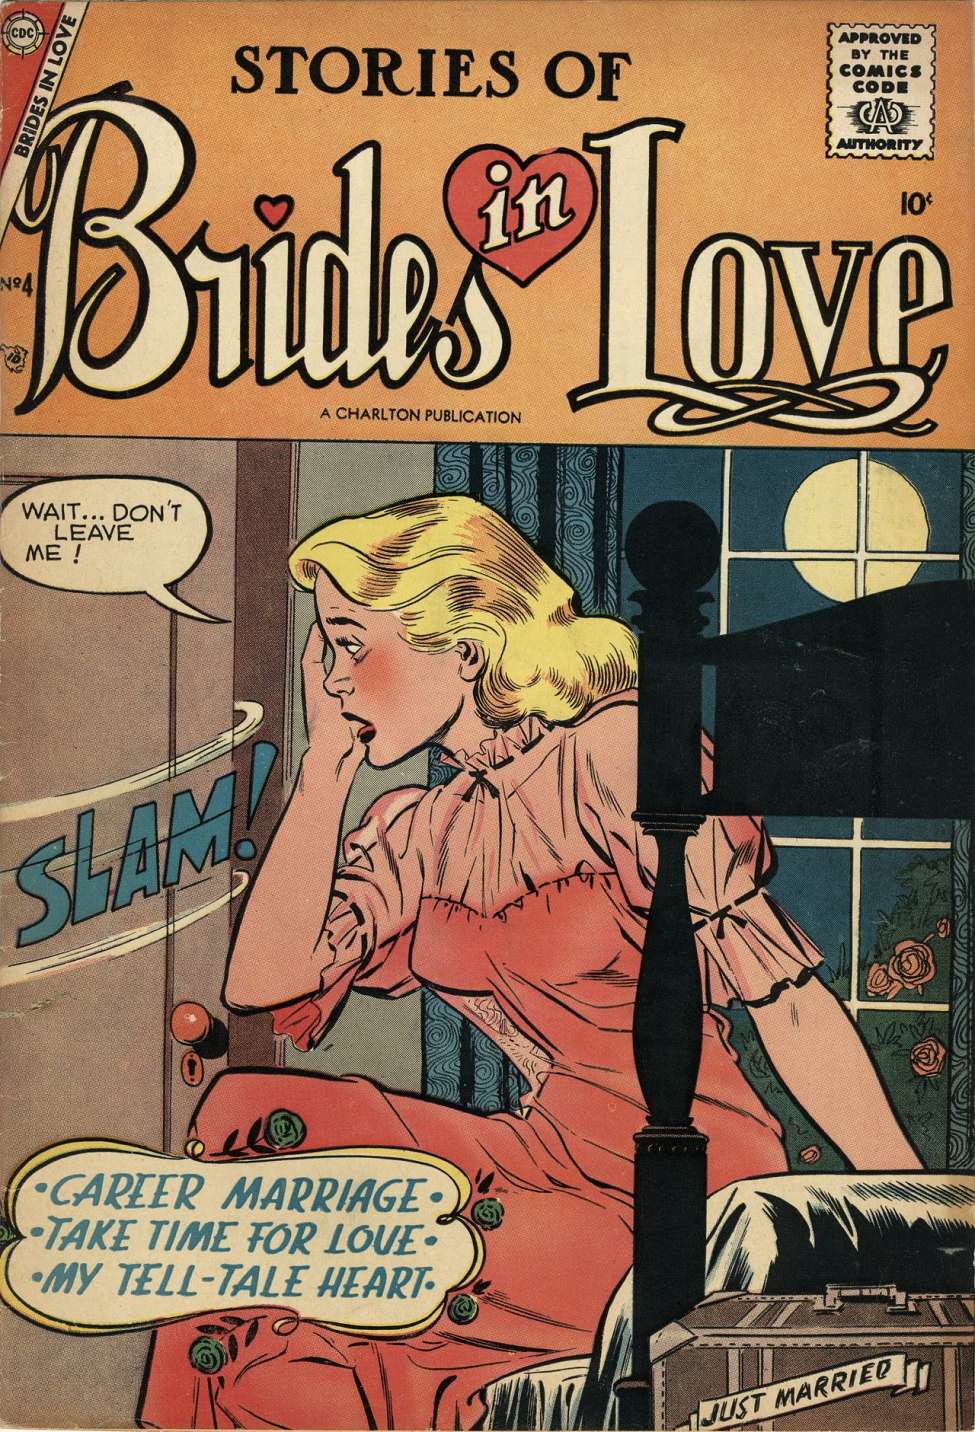 Book Cover For Brides in Love 4